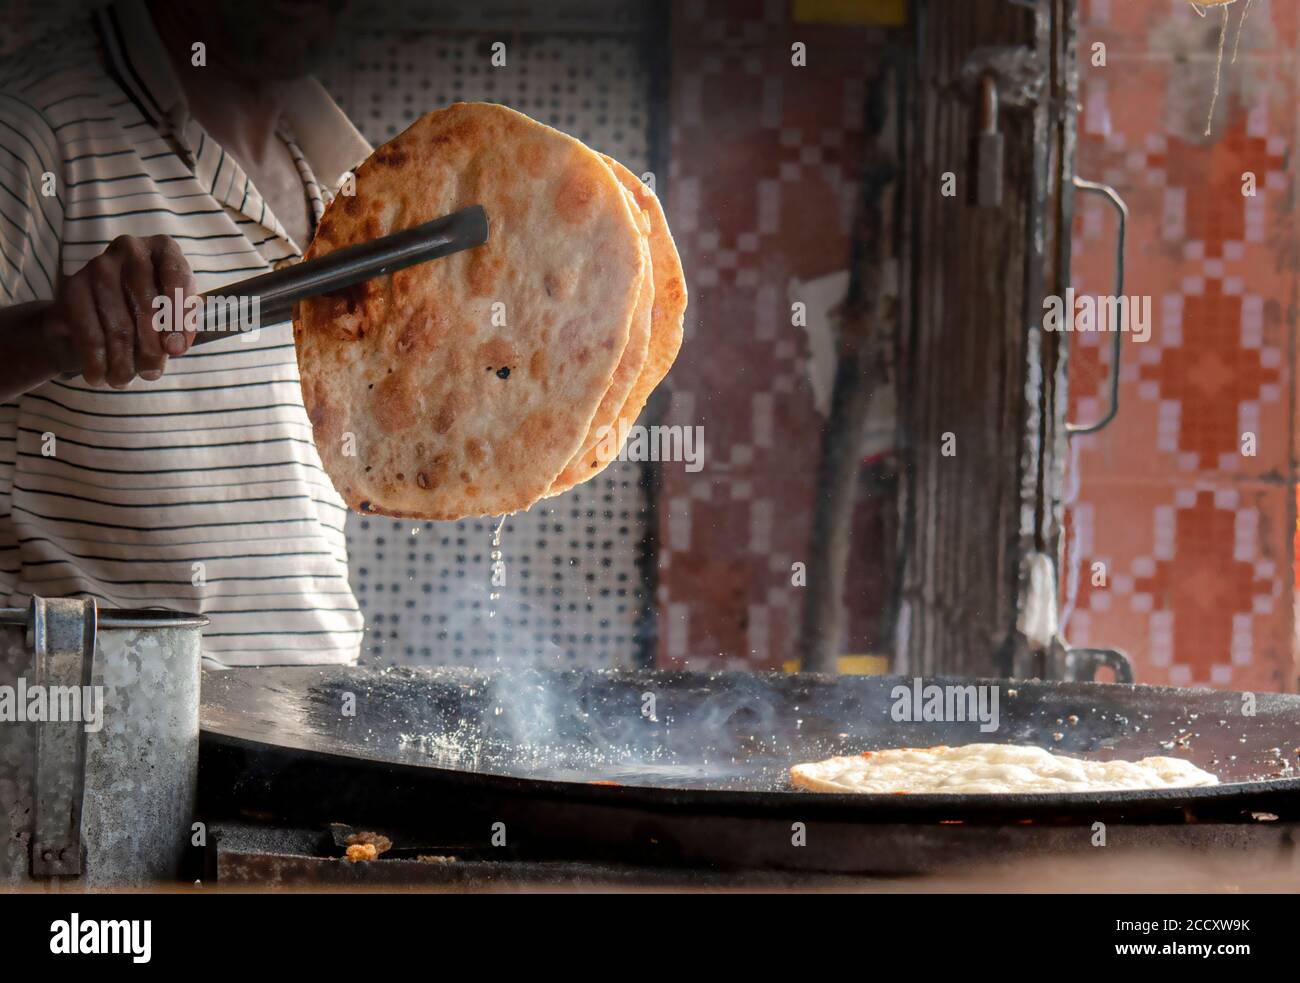 paratha a rich oily food in Pakistan Stock Photo